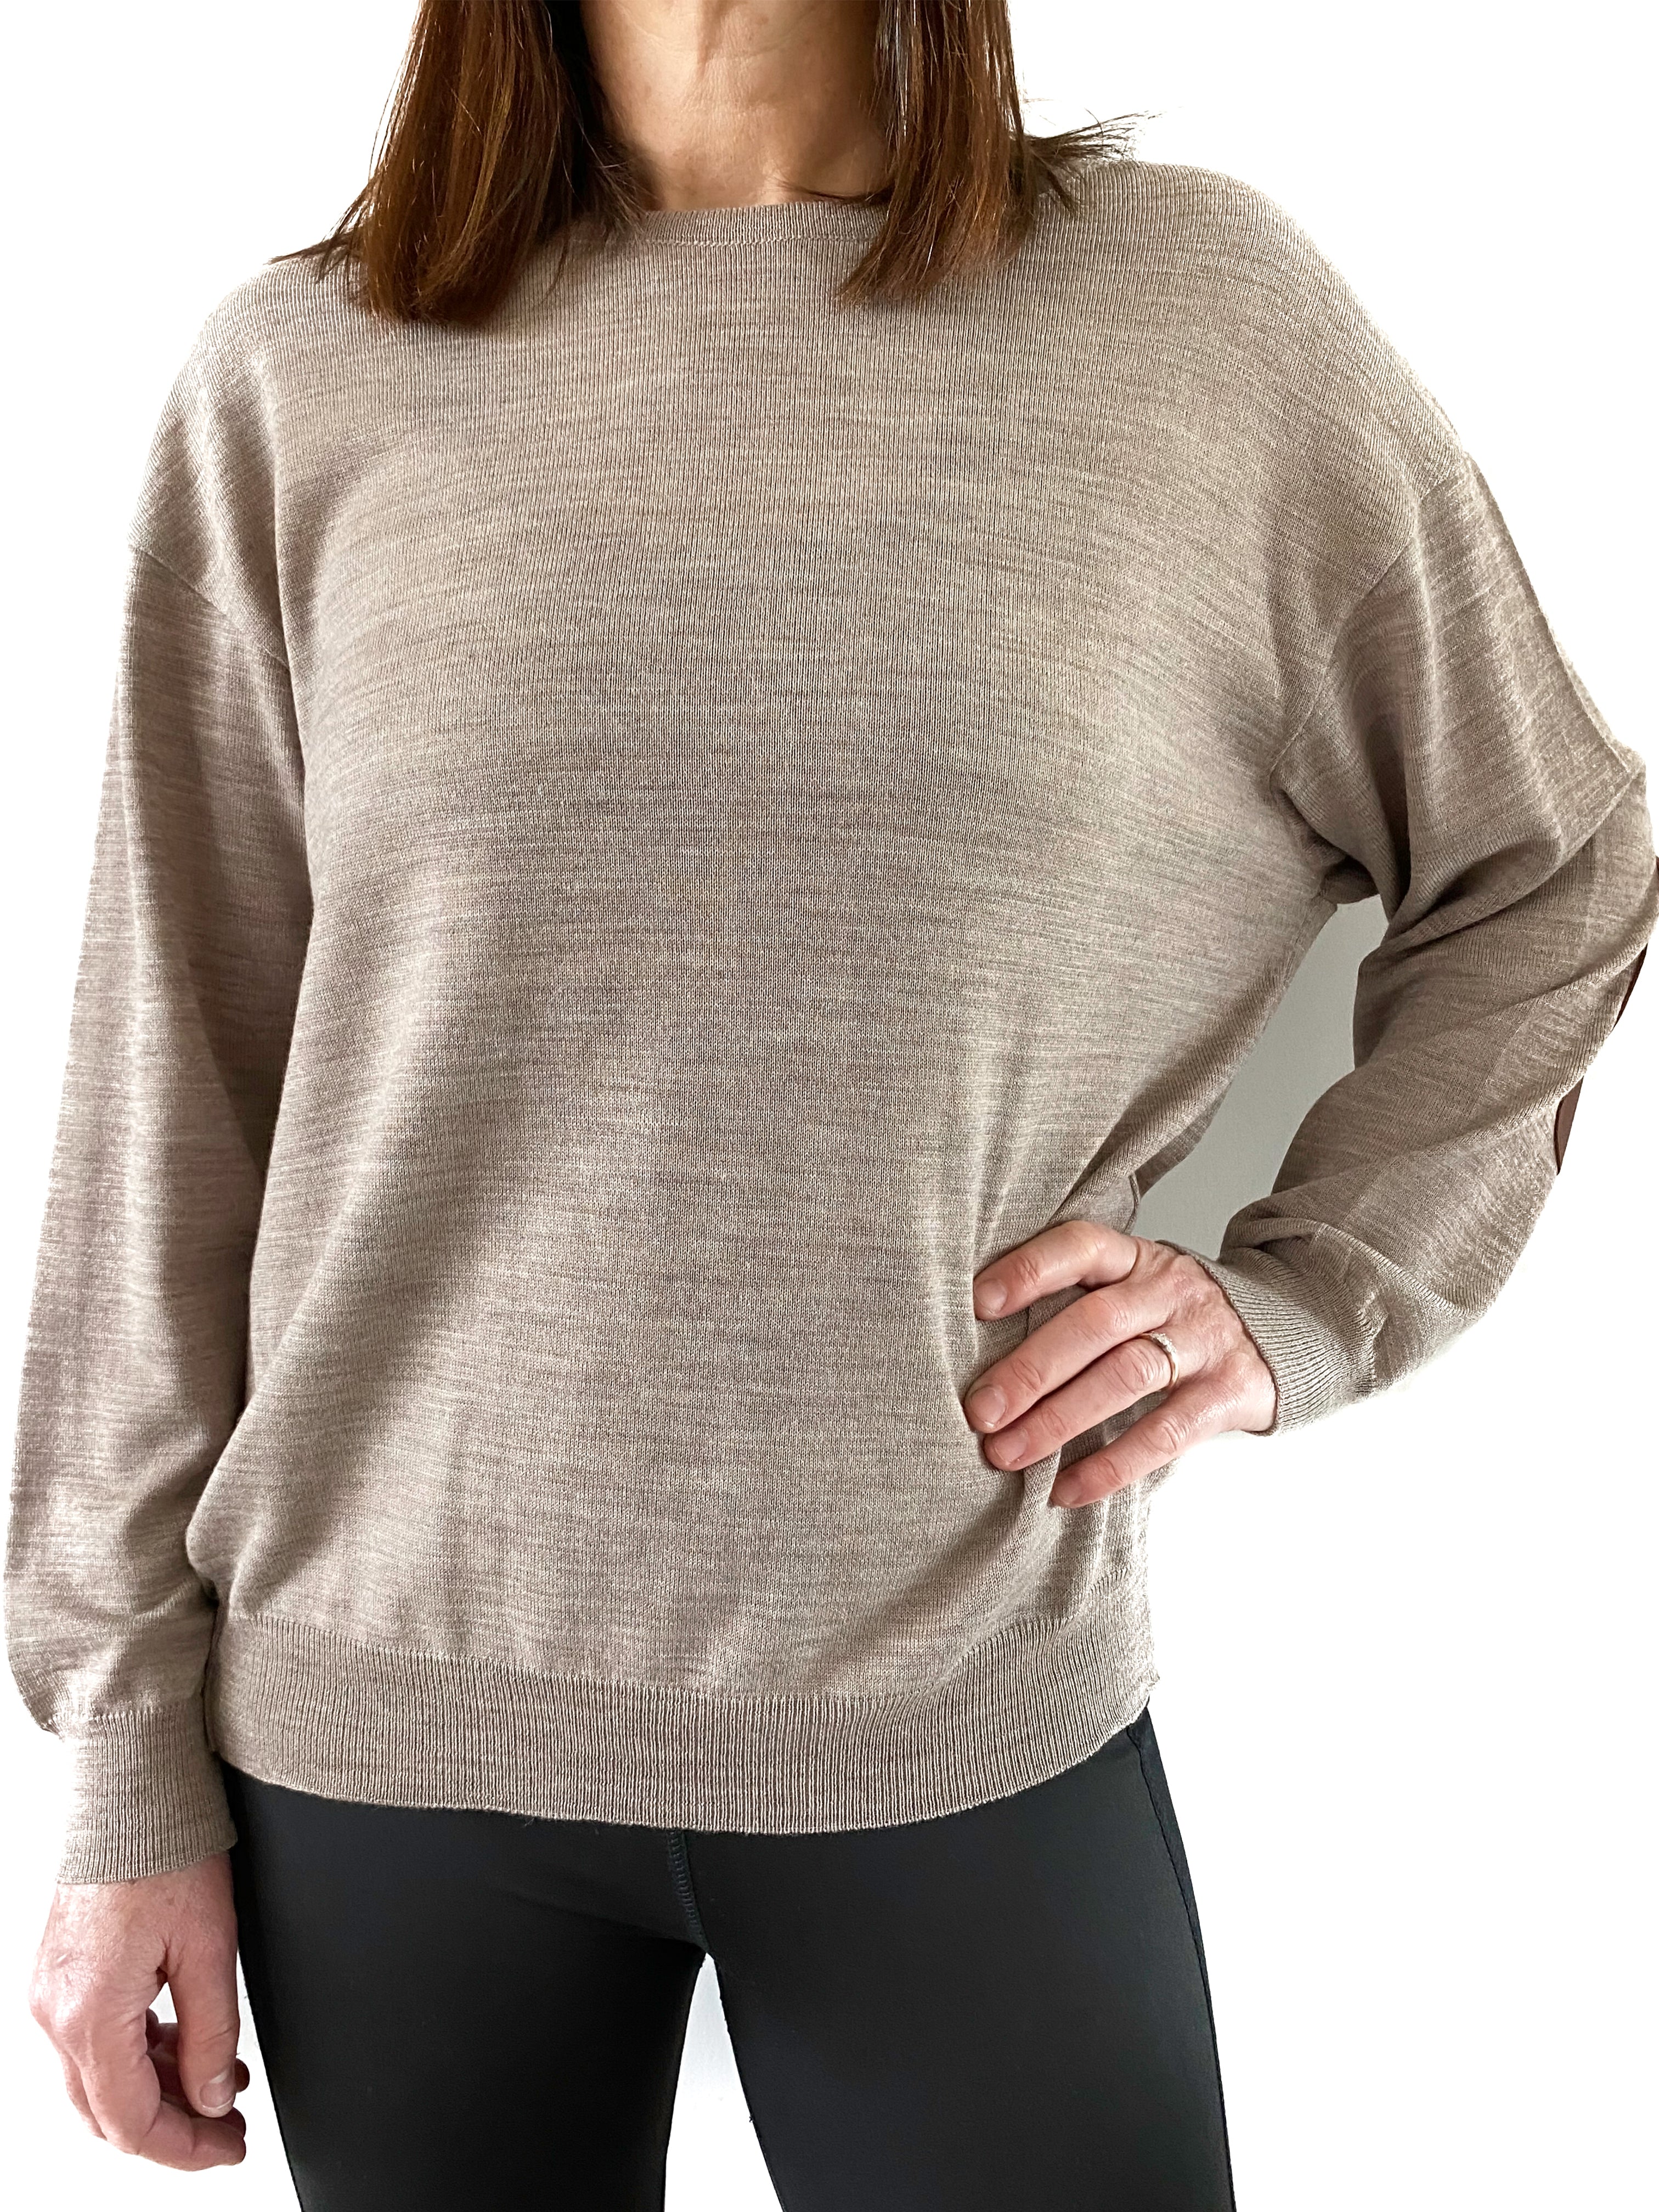 Classic Knit Jumper with Leather Elbow Patches (New Colourways)